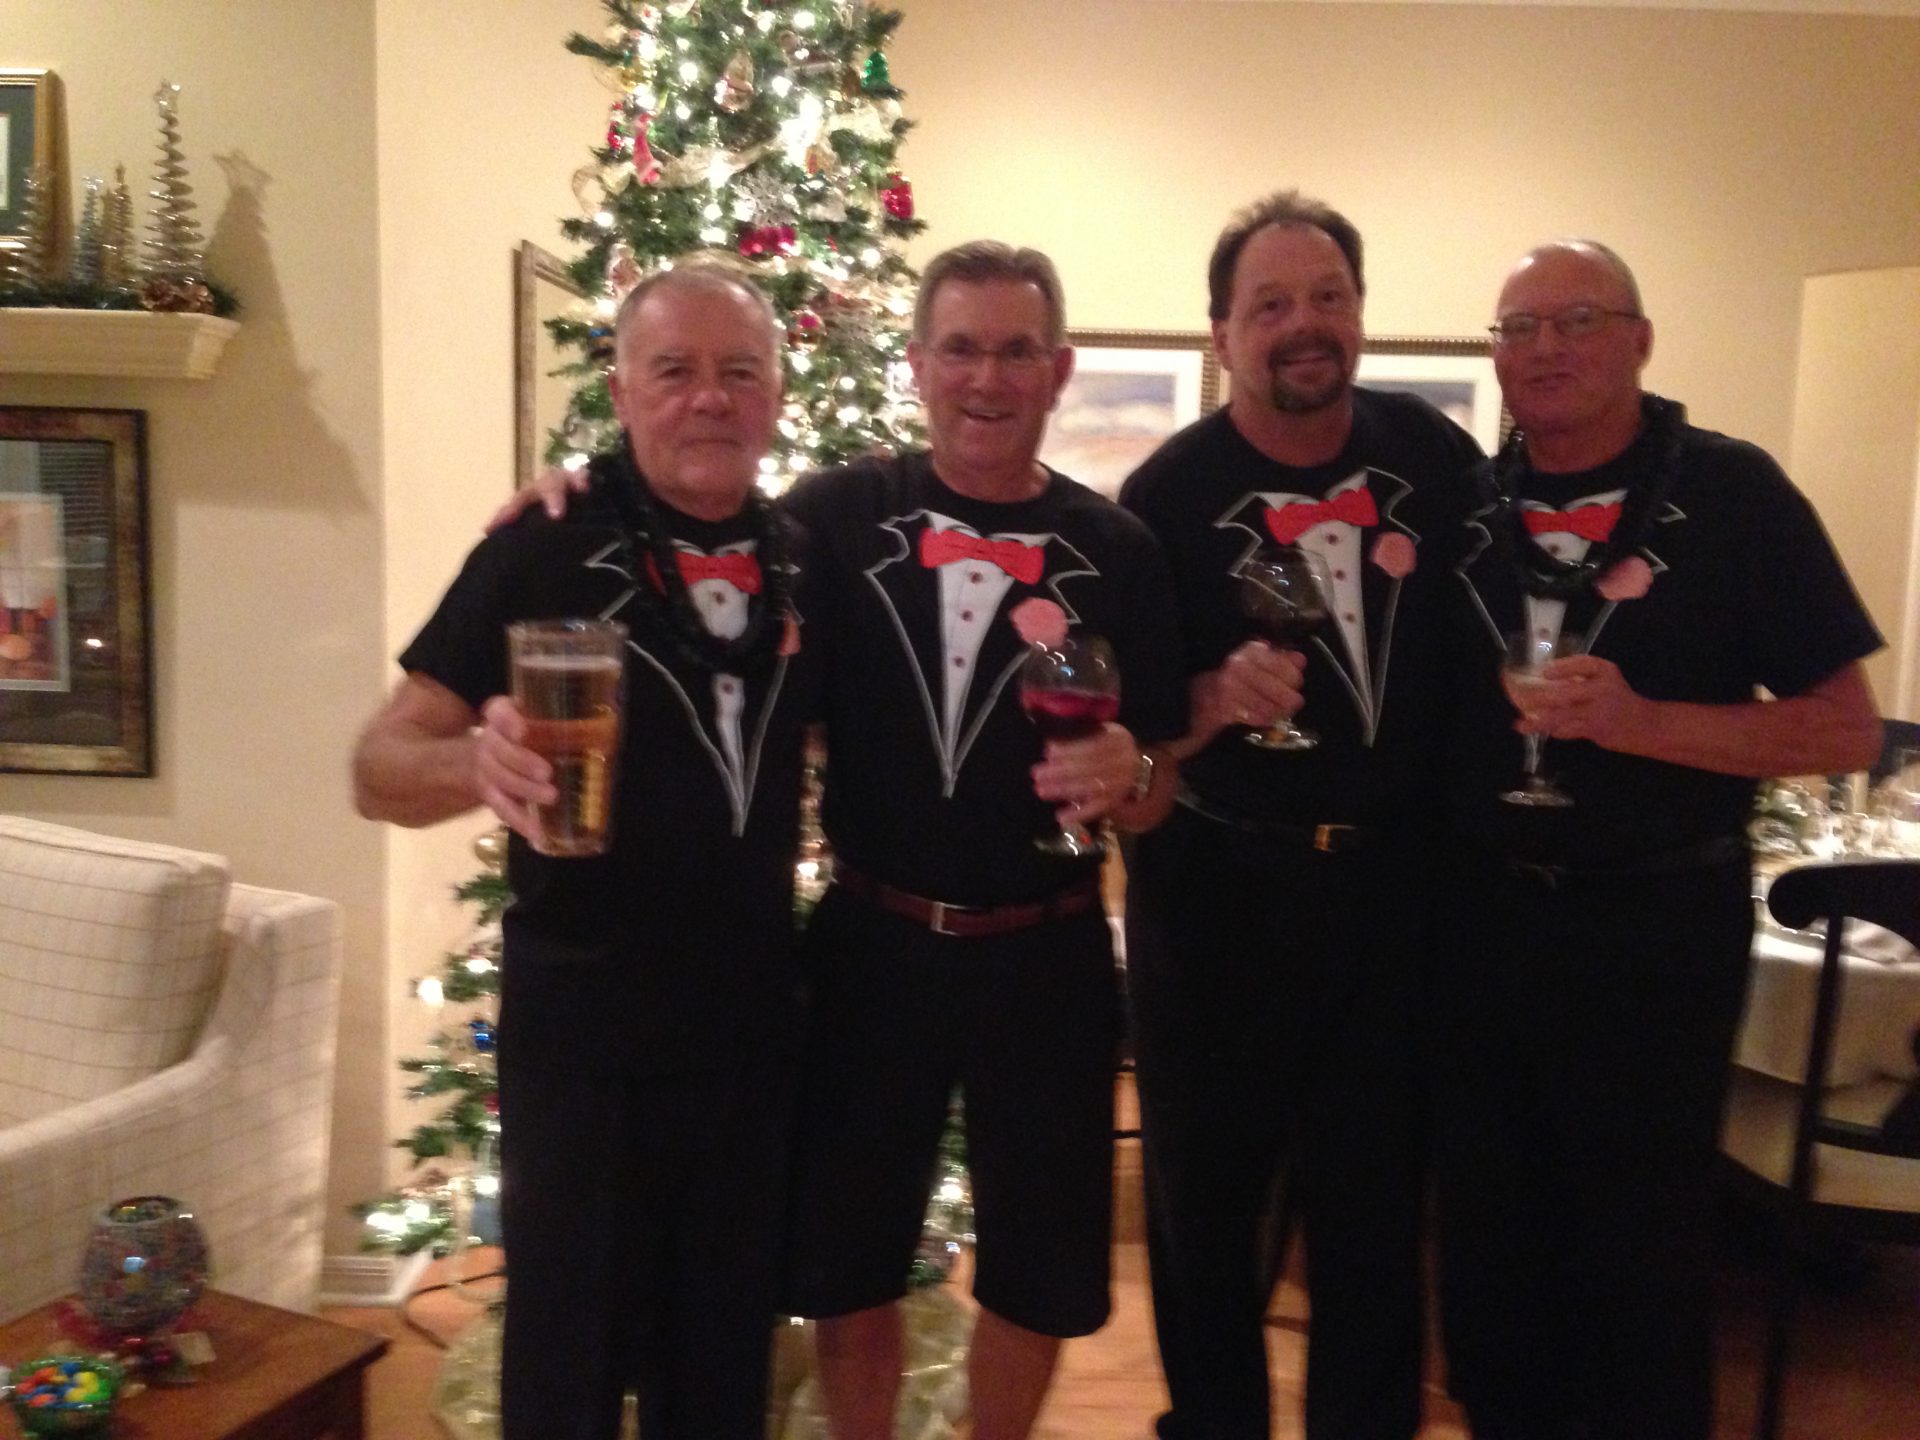 The four amigos of Village of Piedmont celebrating New Year’s Eve 2013. L-R Pat Murphy, Eric Ehlers, Michael Gavigan and Bob Vogel.